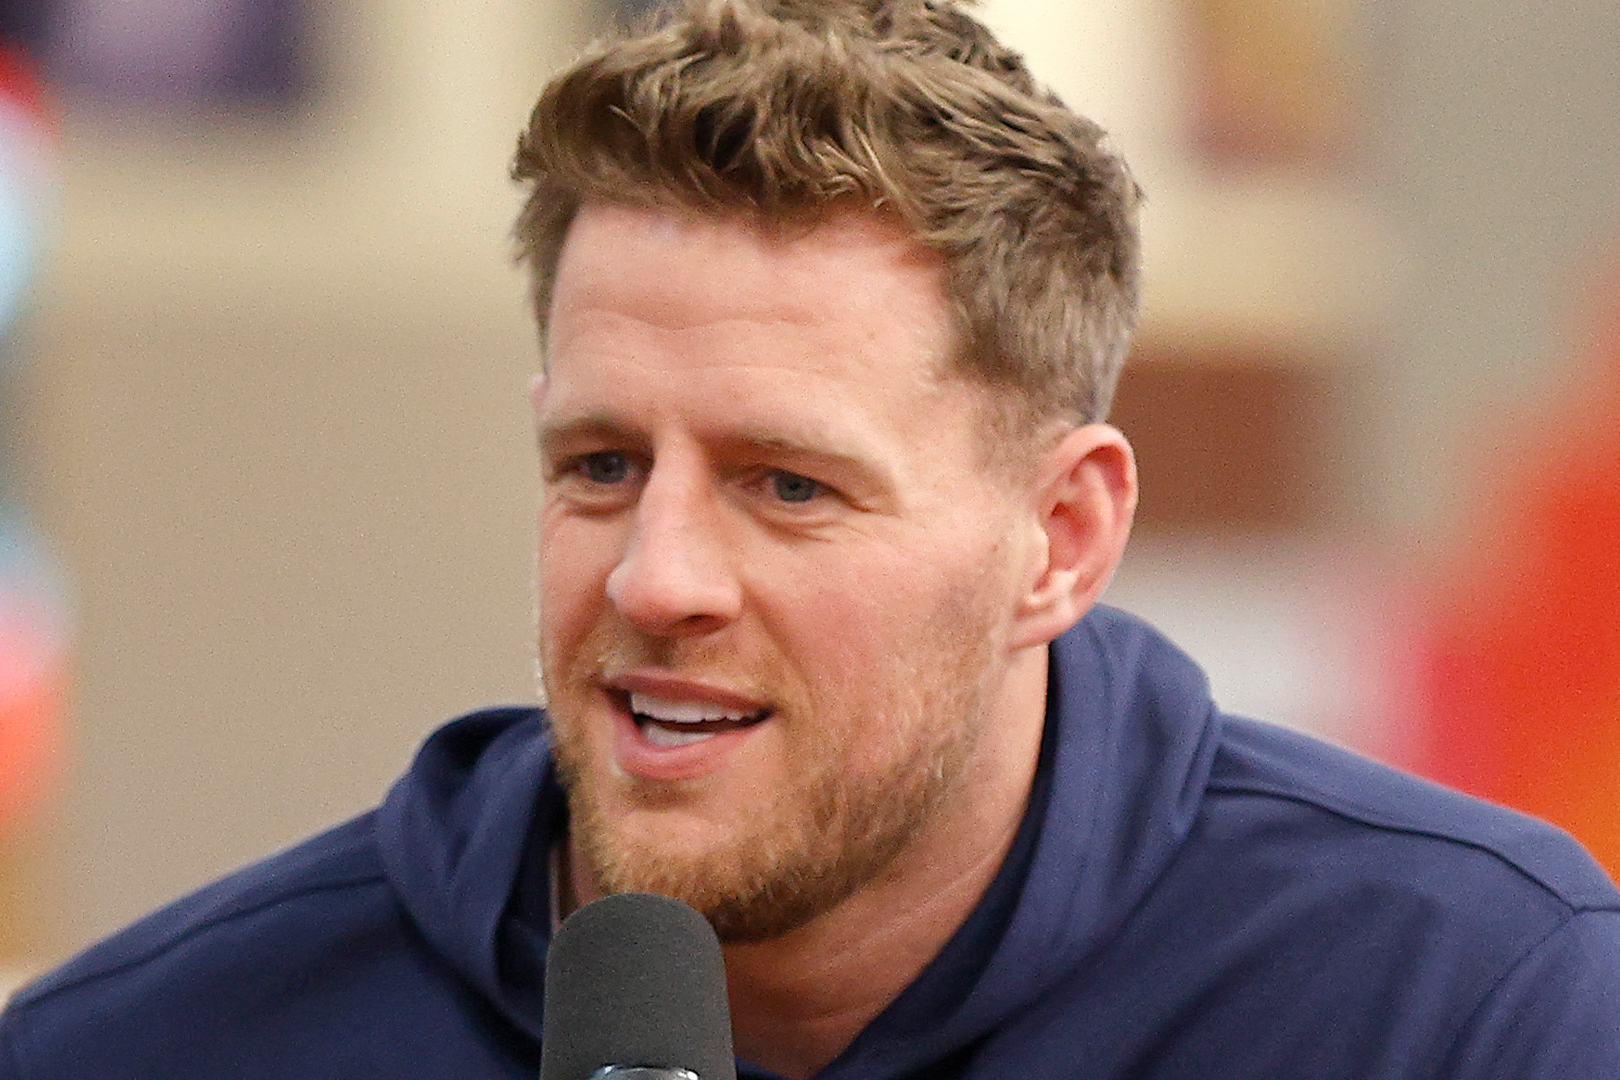 J.J. Watt Hints at a Possible NFL Return: Could the Texans Reunite with Their Legendary Defender?